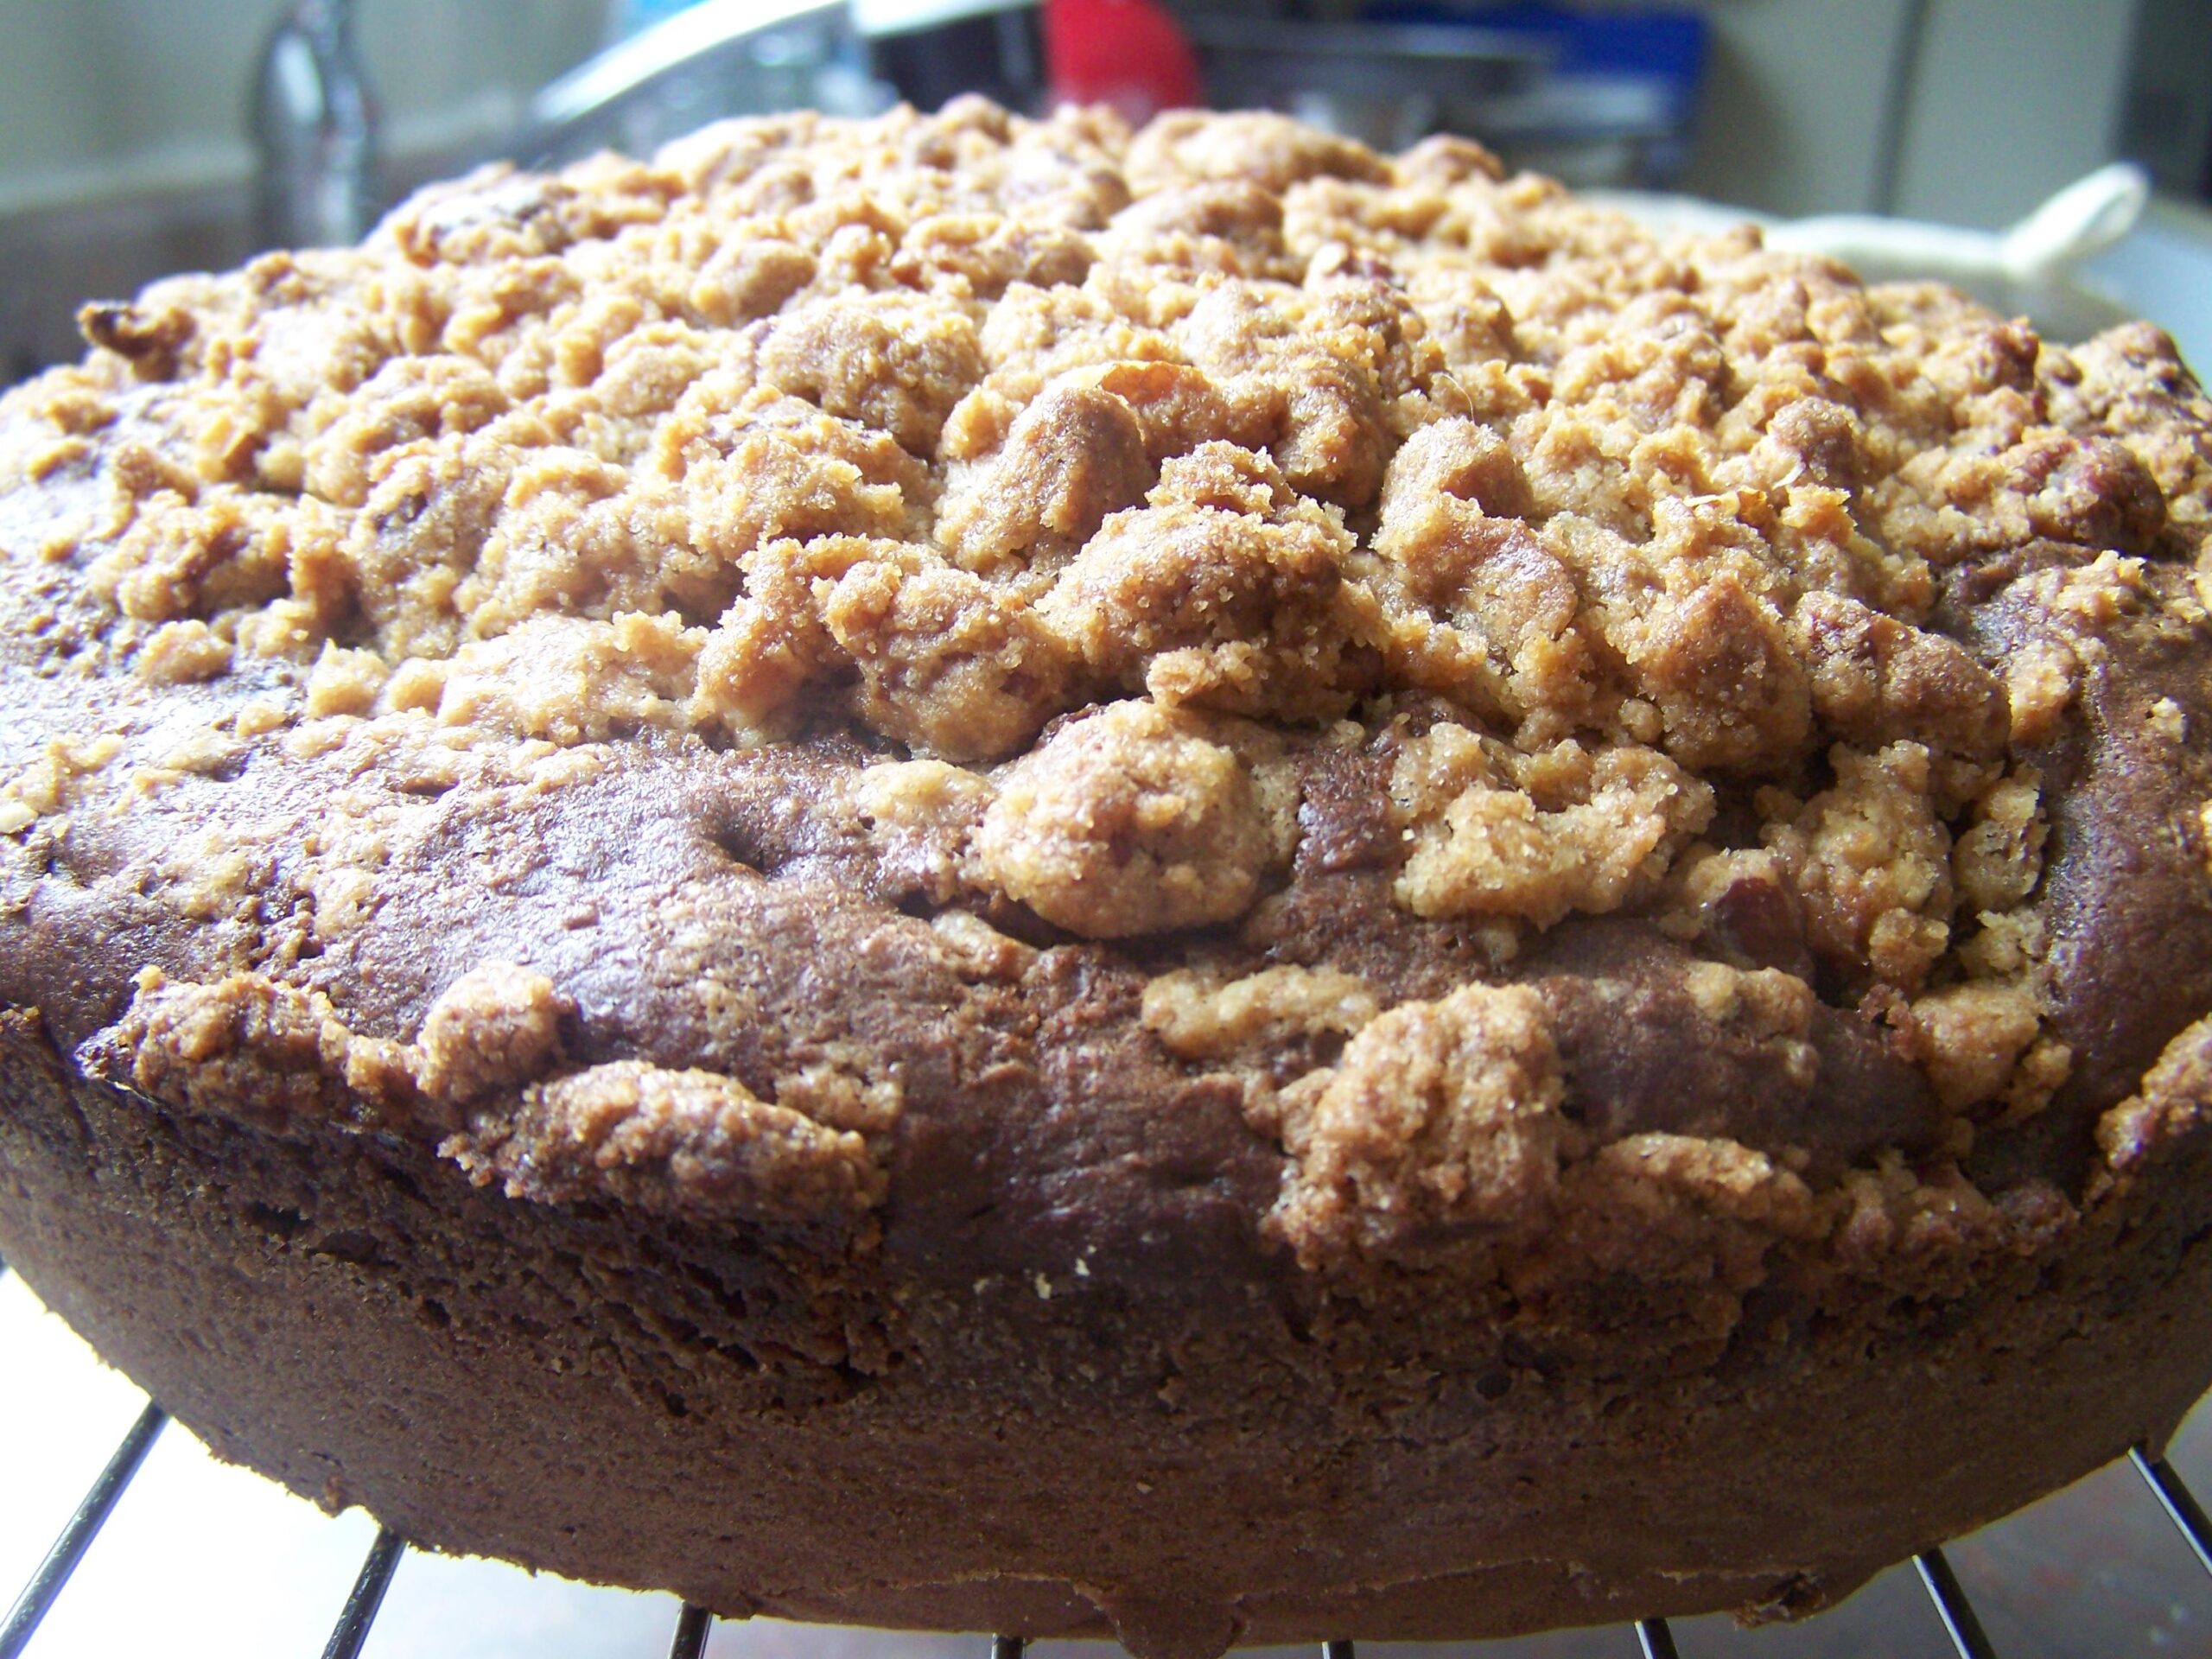  Indulge your taste buds with this rich Chocolate Coffee Cake